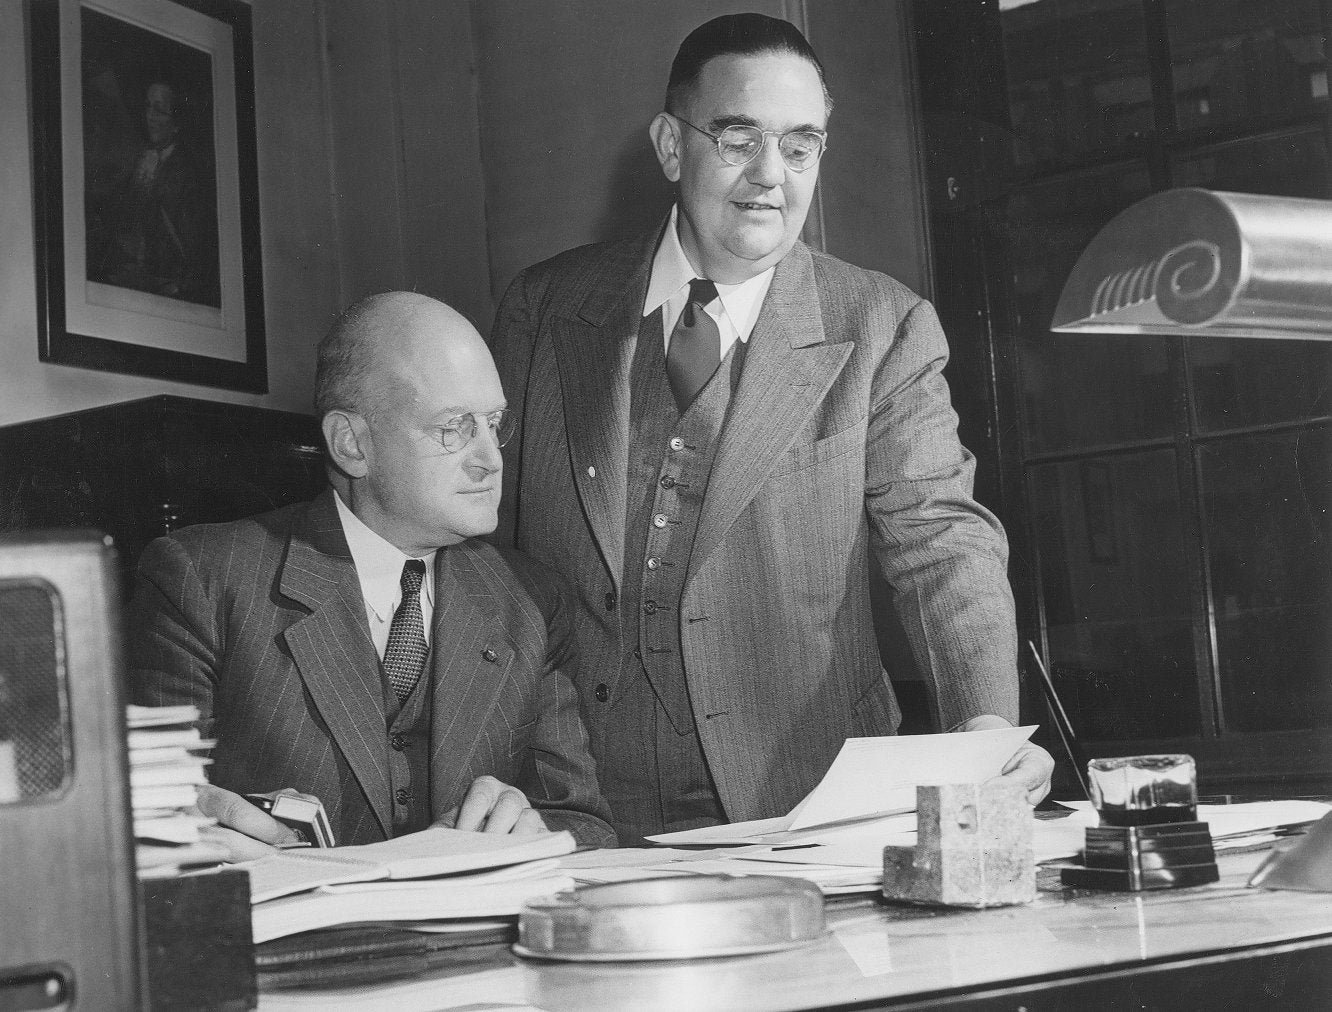 C. Canby Balderston (left) and George W. Taylor (right), c. 1945